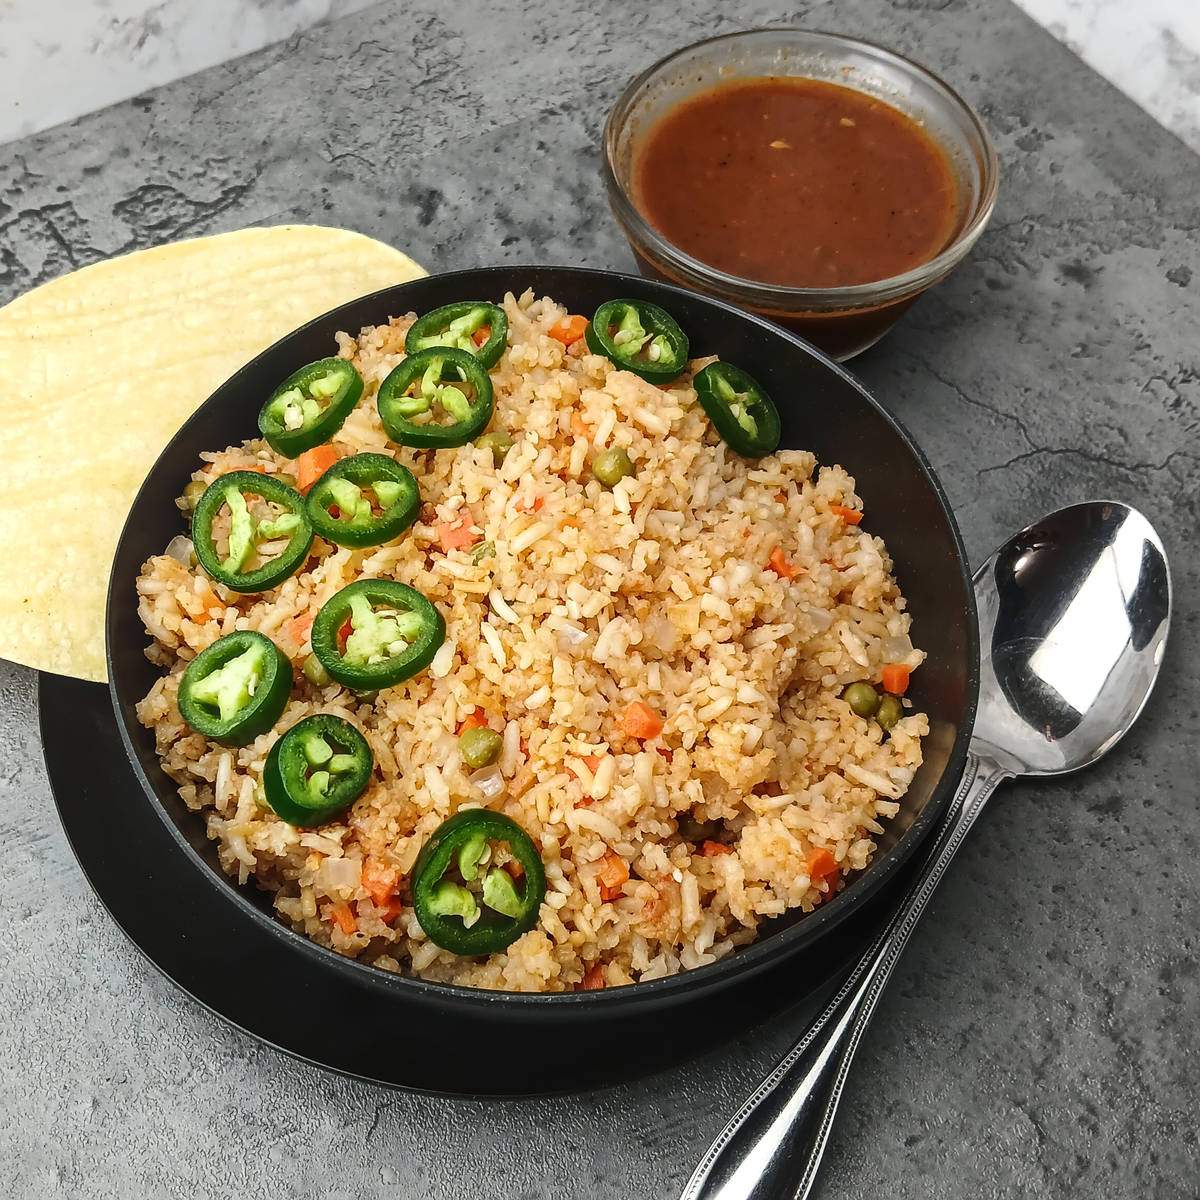 Low sodium Mexican rice in black bowl with enchilada sauce